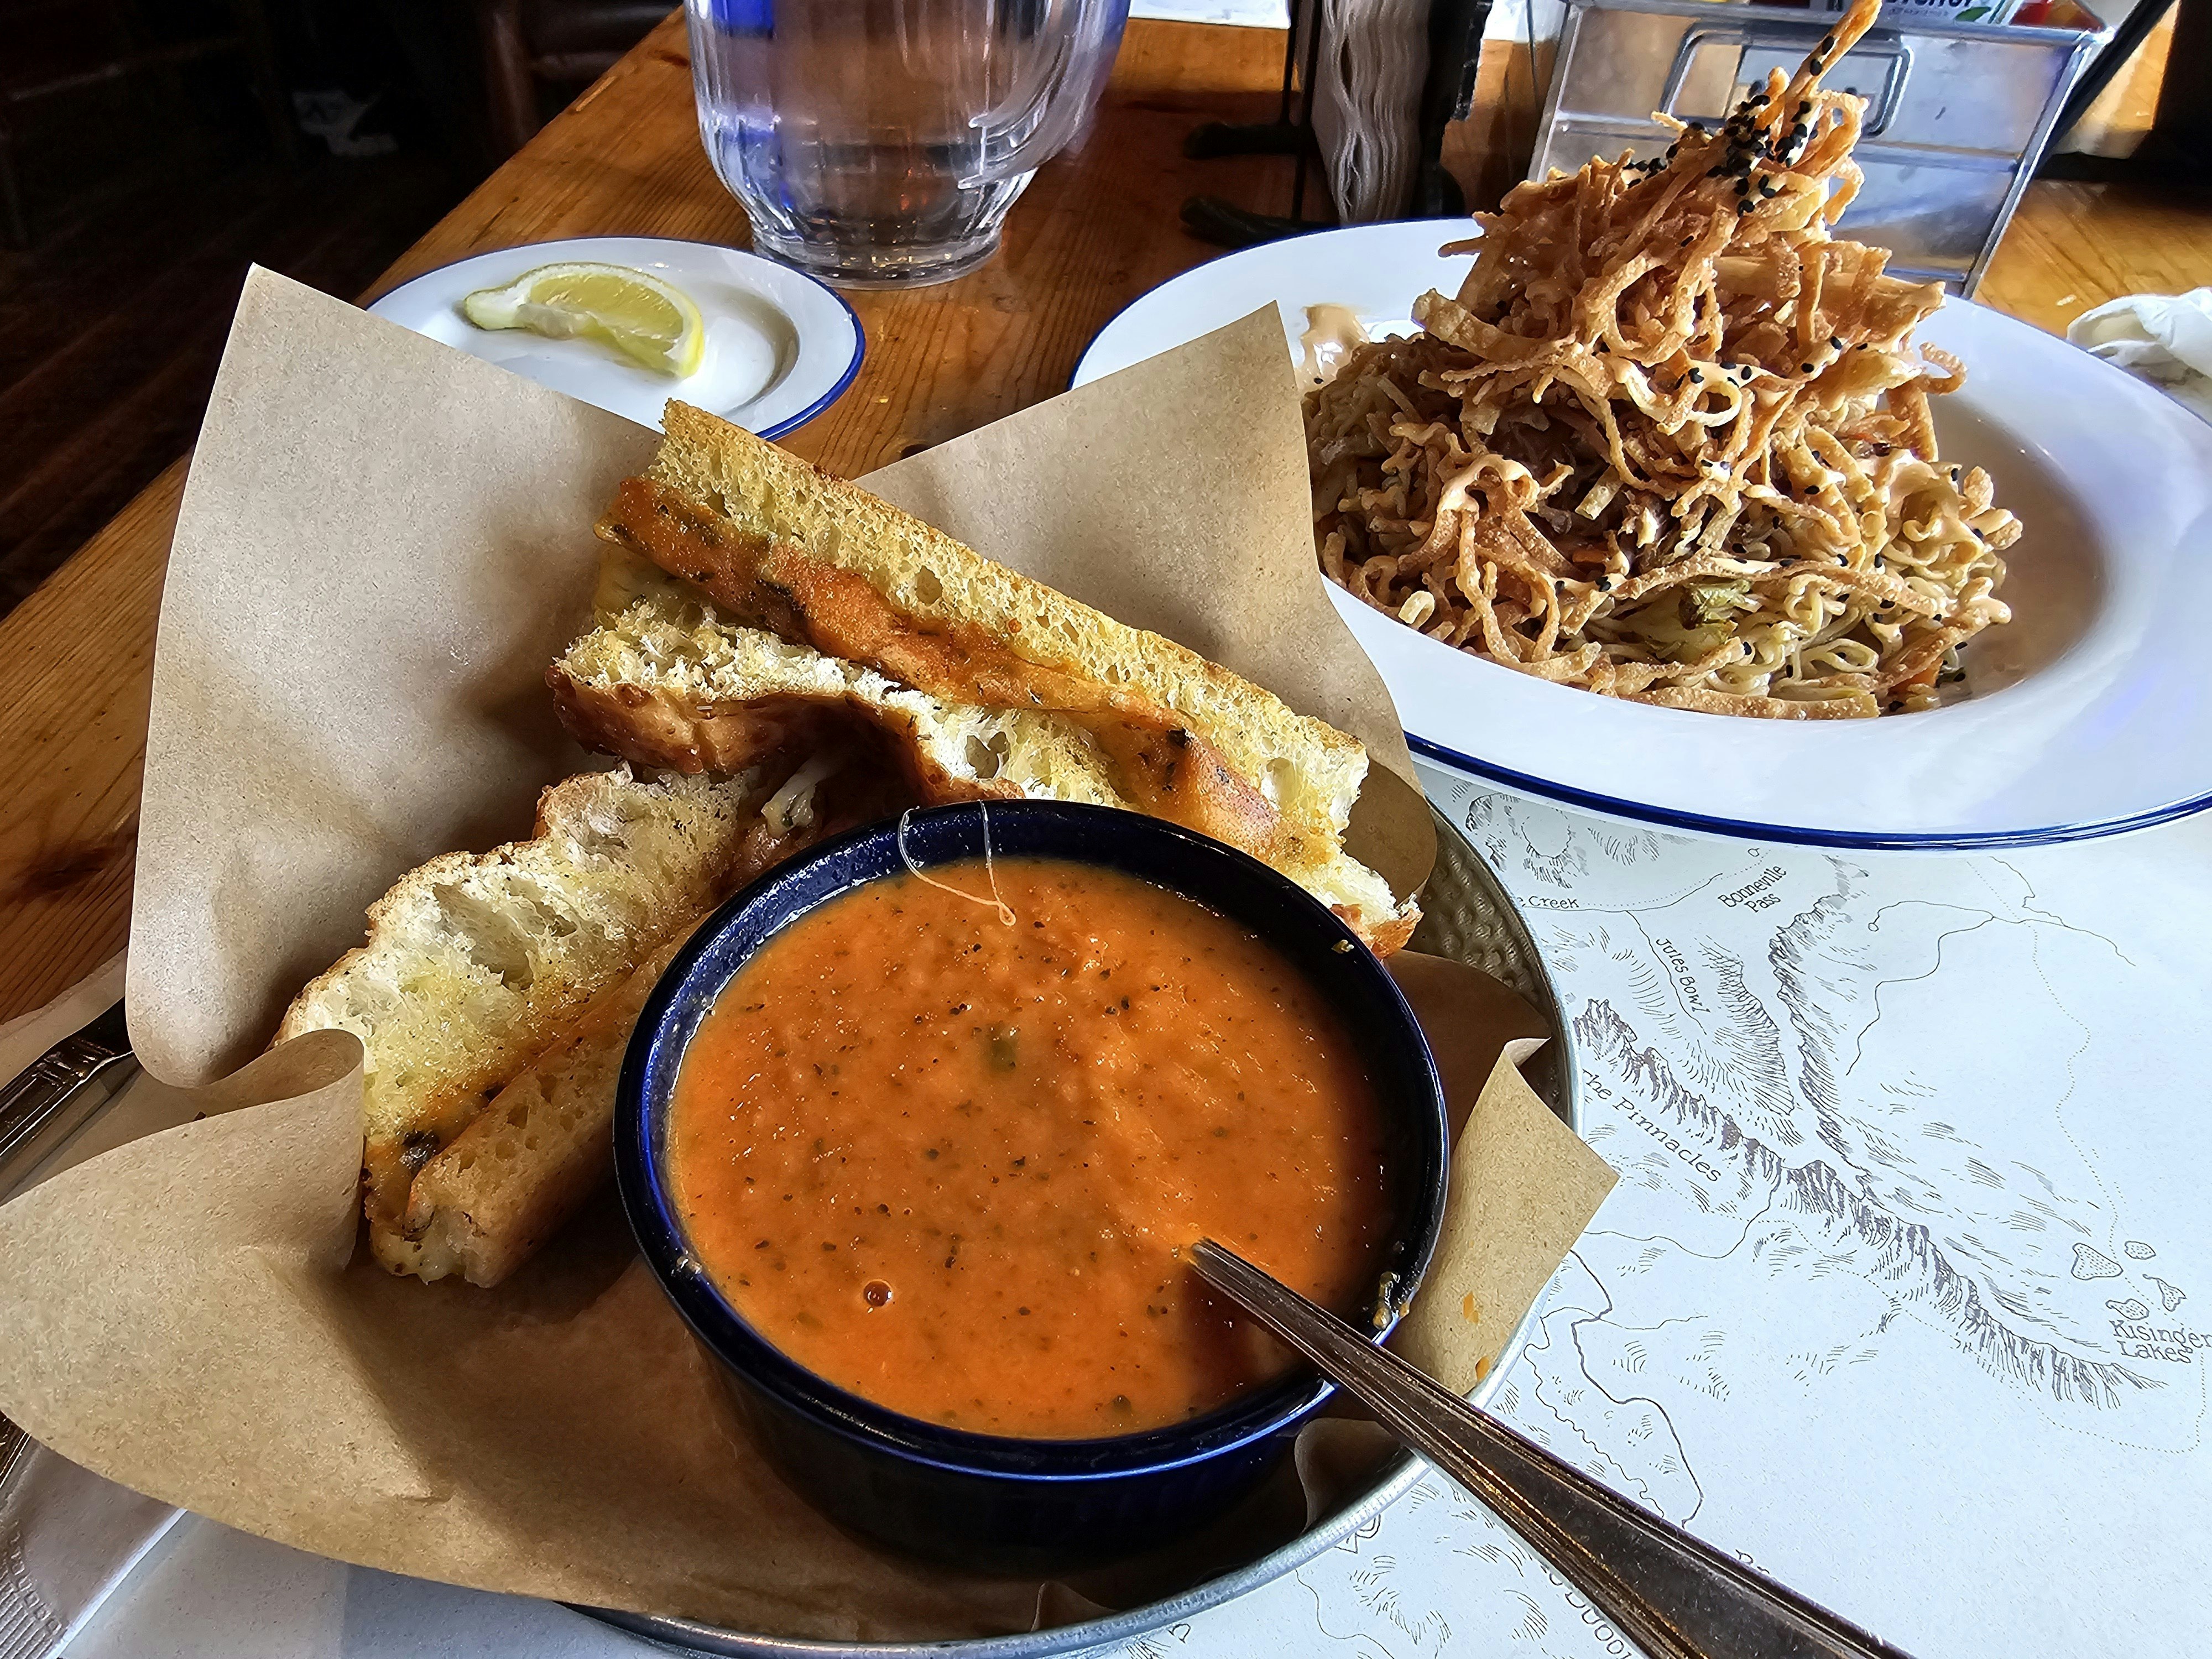 Matchstick cheese sticks and tomato soup with a pulled pork and sesame noodle salad.